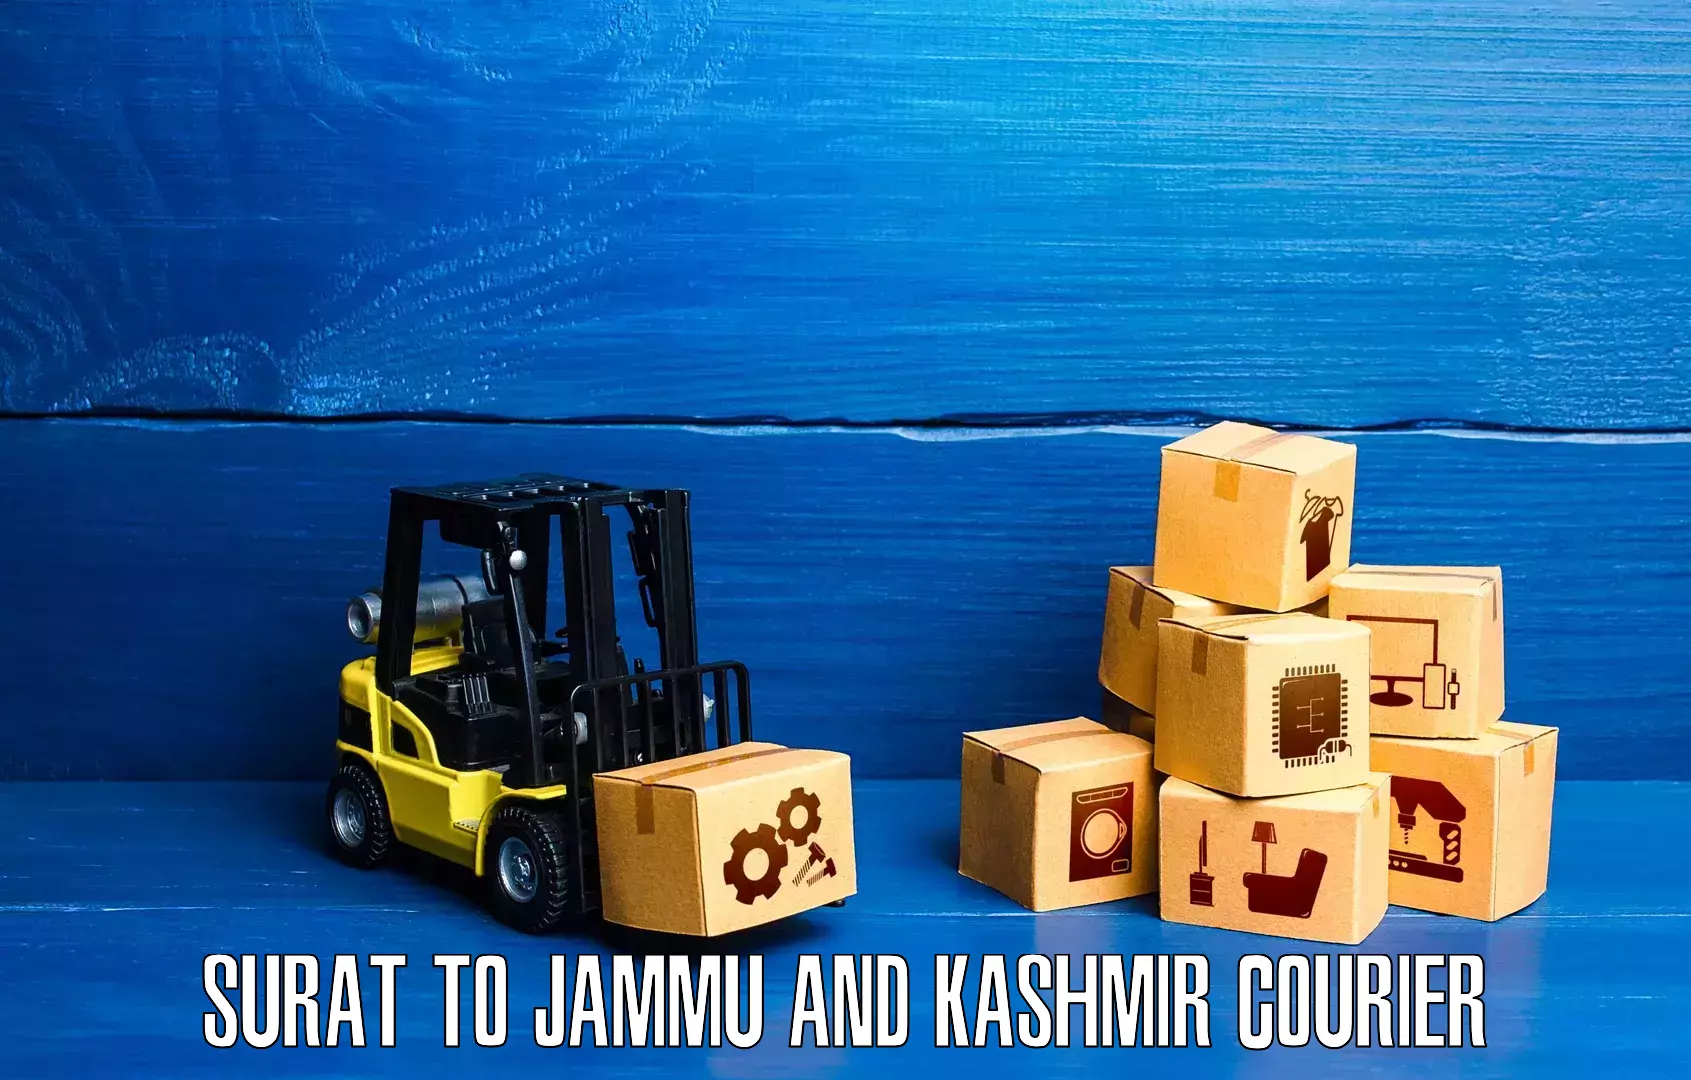 Flexible delivery schedules in Surat to Baramulla